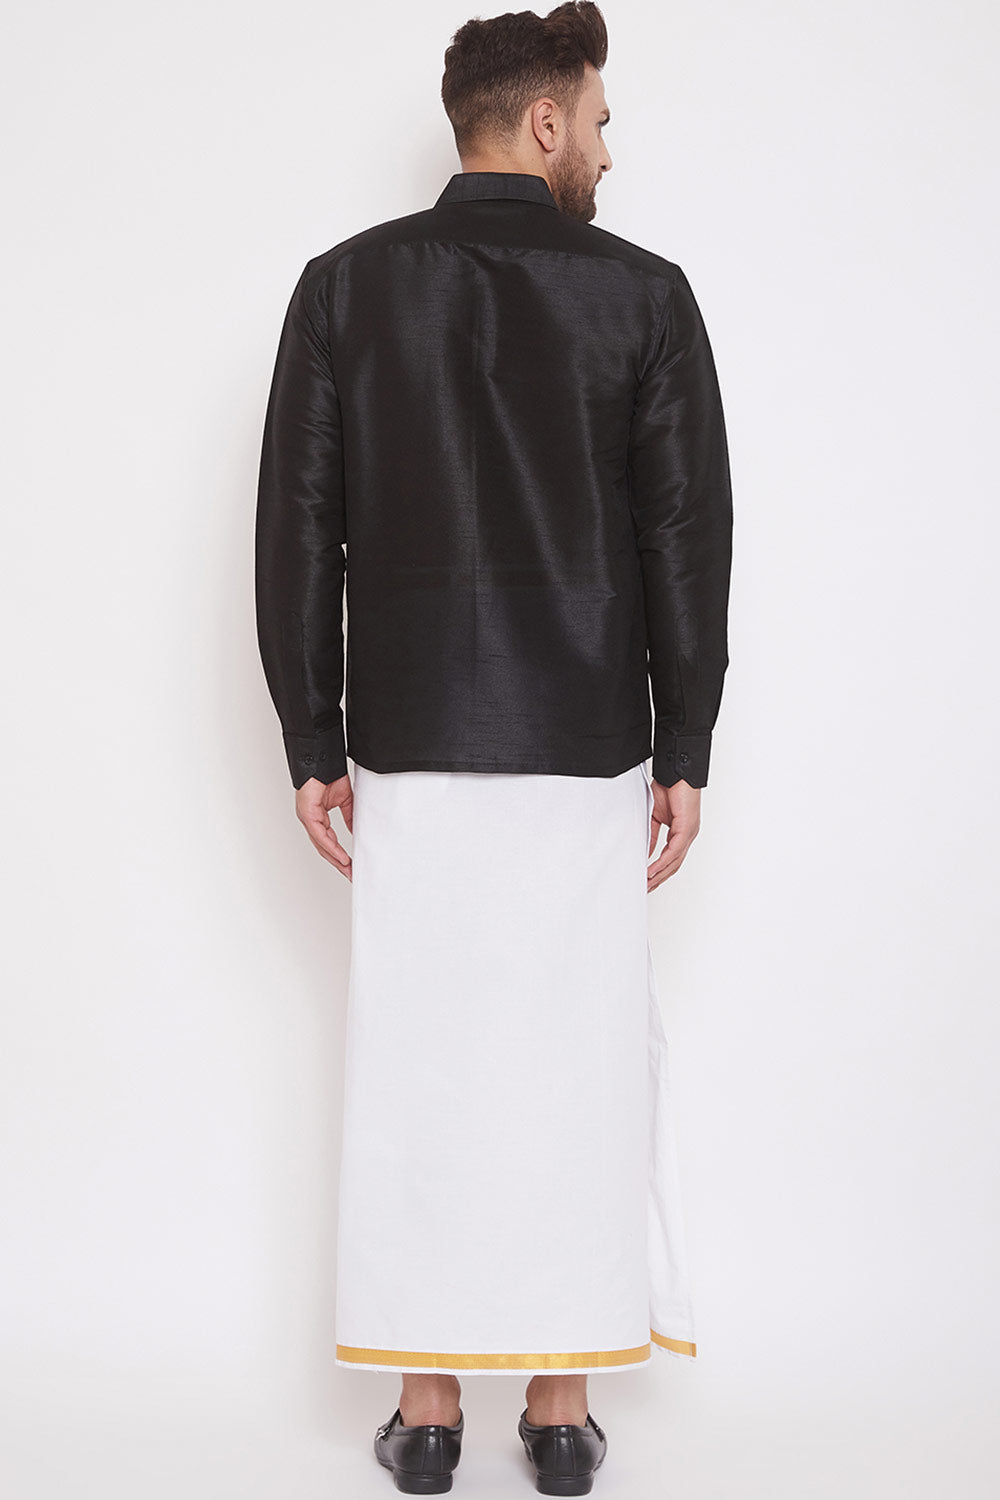 Solid Black Shirt and Mundu for Casual Wear